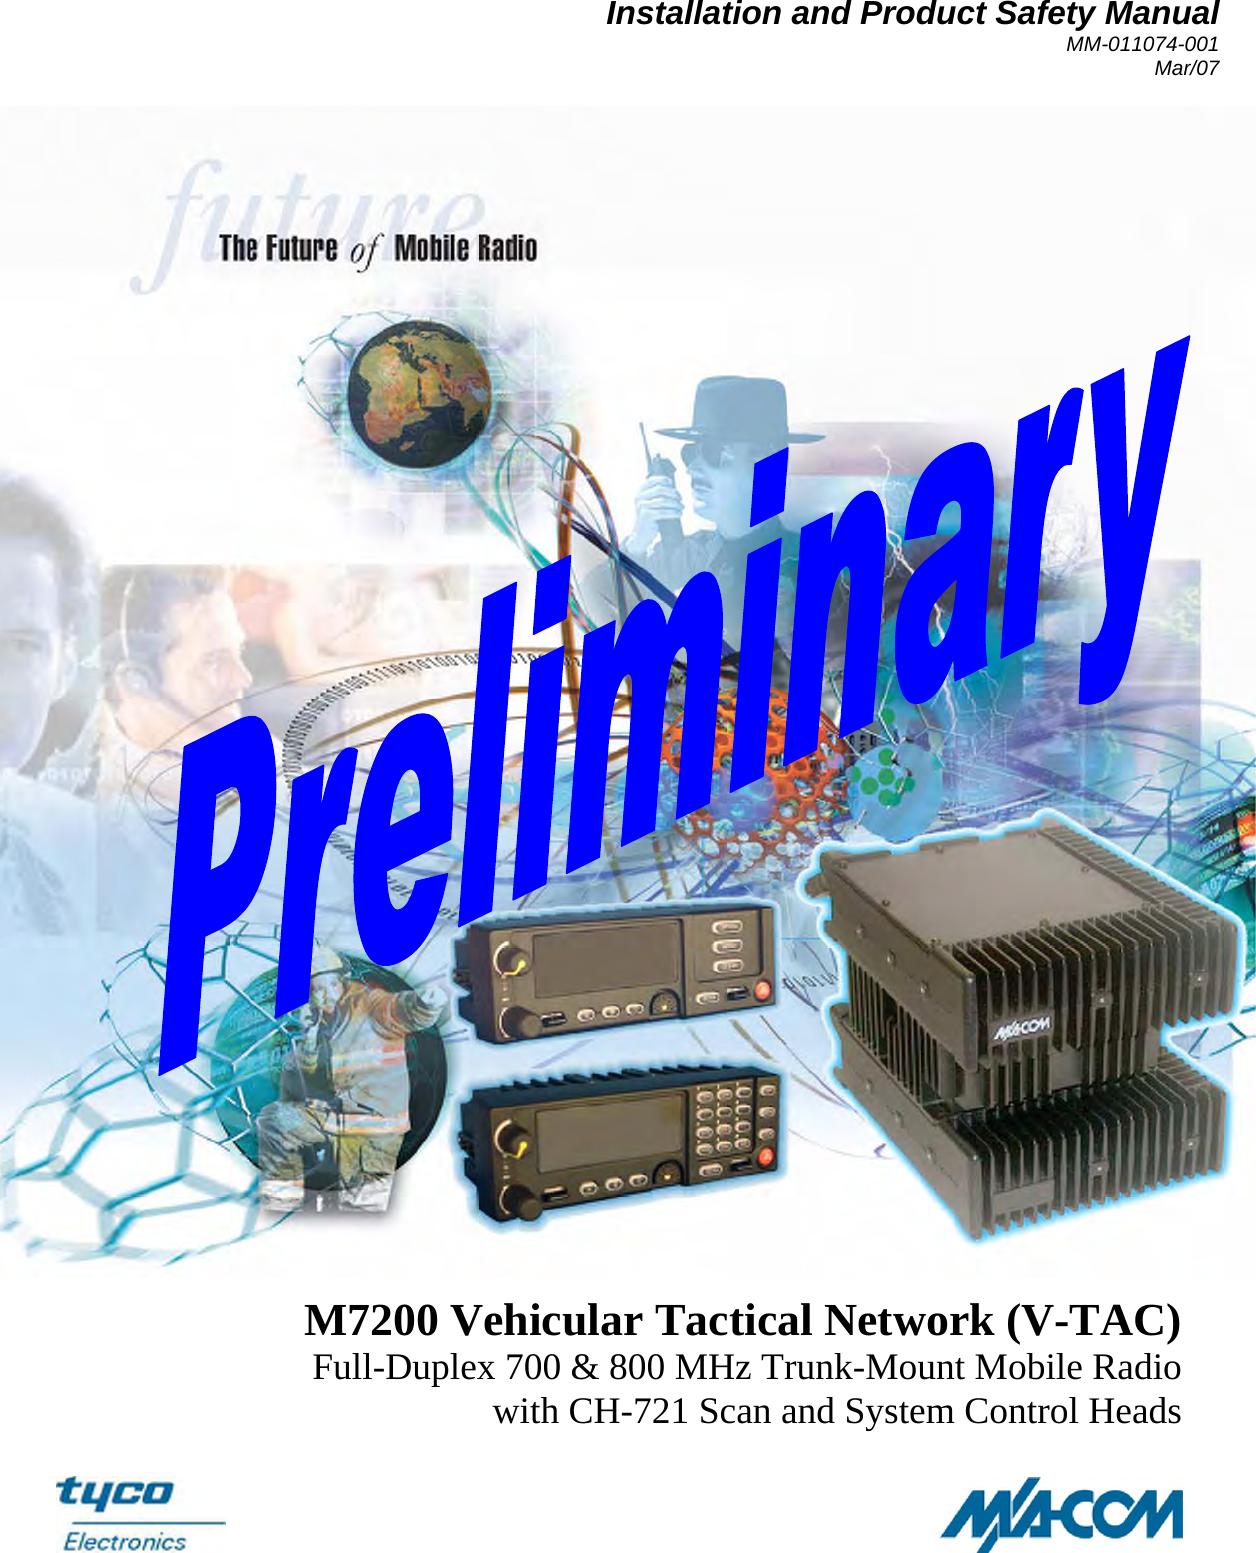 Installation and Product Safety Manual MM-011074-001 Mar/07   M7200 Vehicular Tactical Network (V-TAC) Full-Duplex 700 &amp; 800 MHz Trunk-Mount Mobile Radio with CH-721 Scan and System Control Heads 